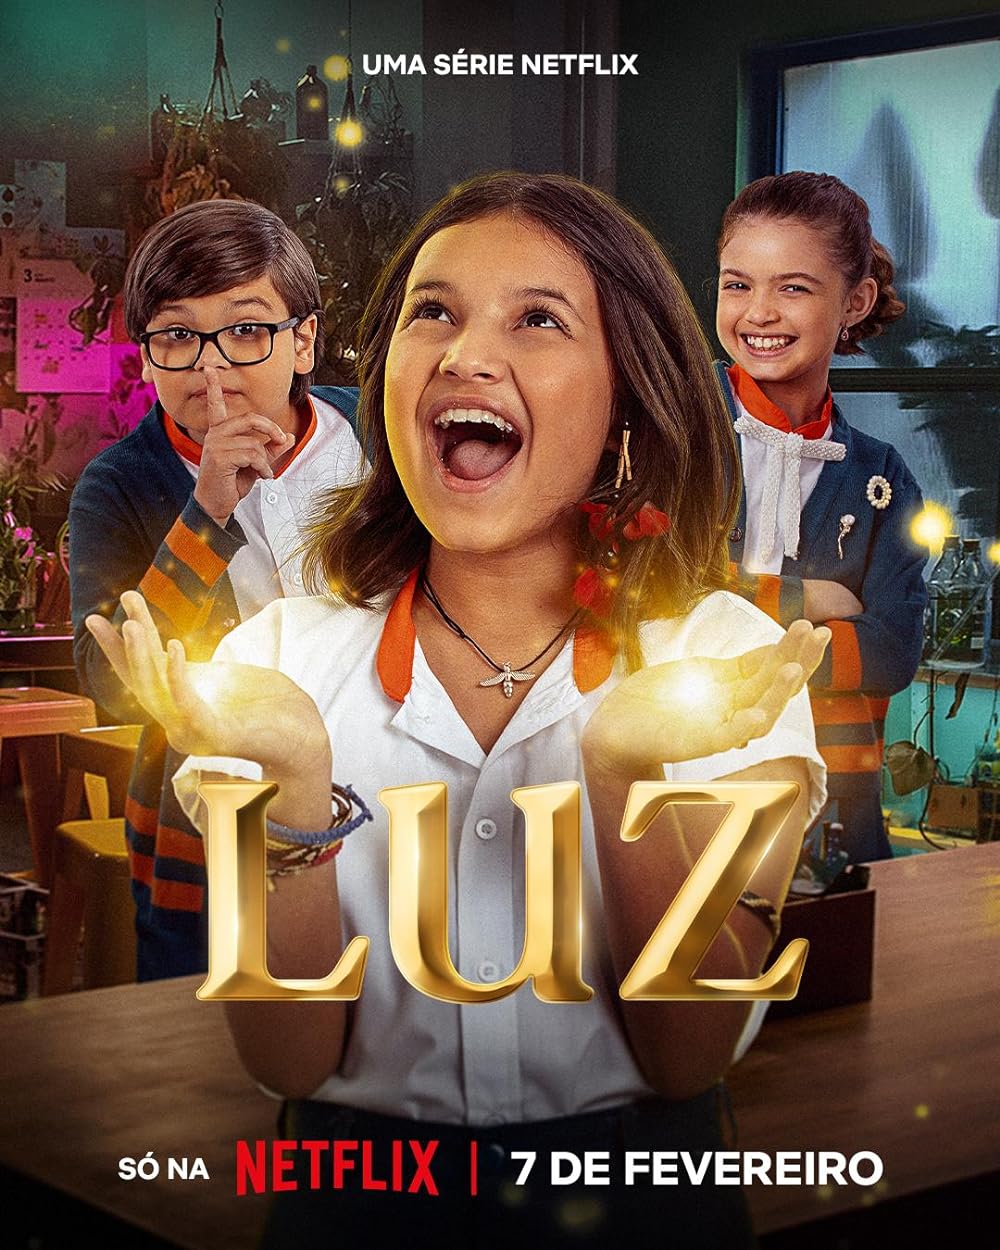 Luz: The Light of the Heart (February 7) - Streaming on NetflixLuz: The Light of the Heart follows the enchanting tale of Luz, a spirited orphan raised by a nurturing Kaingang family. Infused with the rich traditions and wisdom of the indigenous community, Luz yearns to understand her origins. Embarking on an intriguing adventure with her faithful firefly companion, Luz's quest leads her through unexpected challenges and discoveries, illuminating her path to self-discovery.